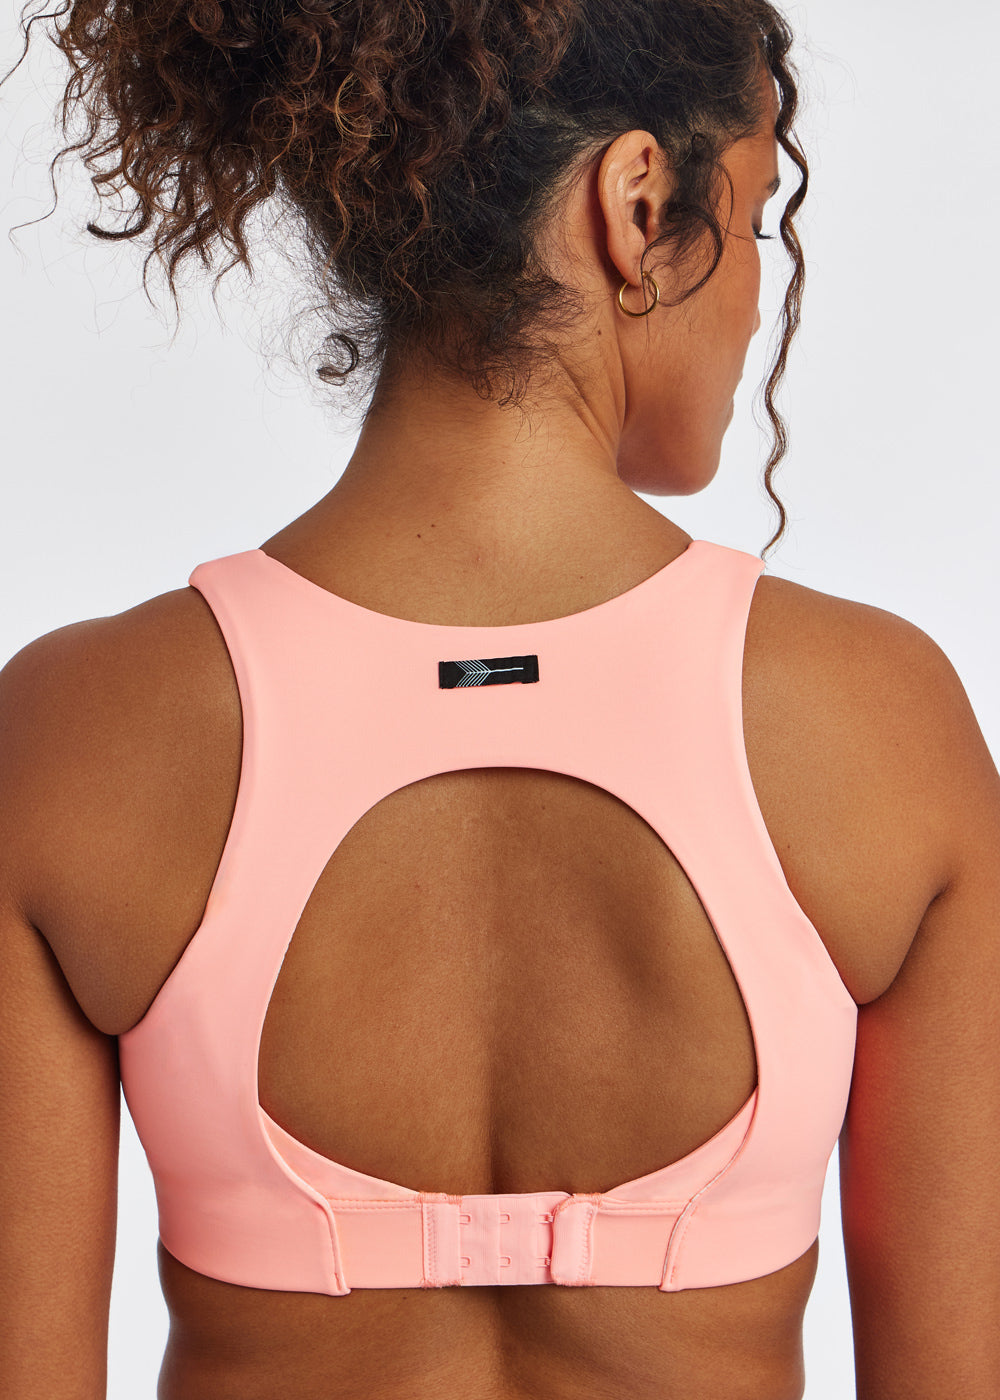 Ivory Rose Fuller Bust contrast sports bra with strappy back detail in  black and pink